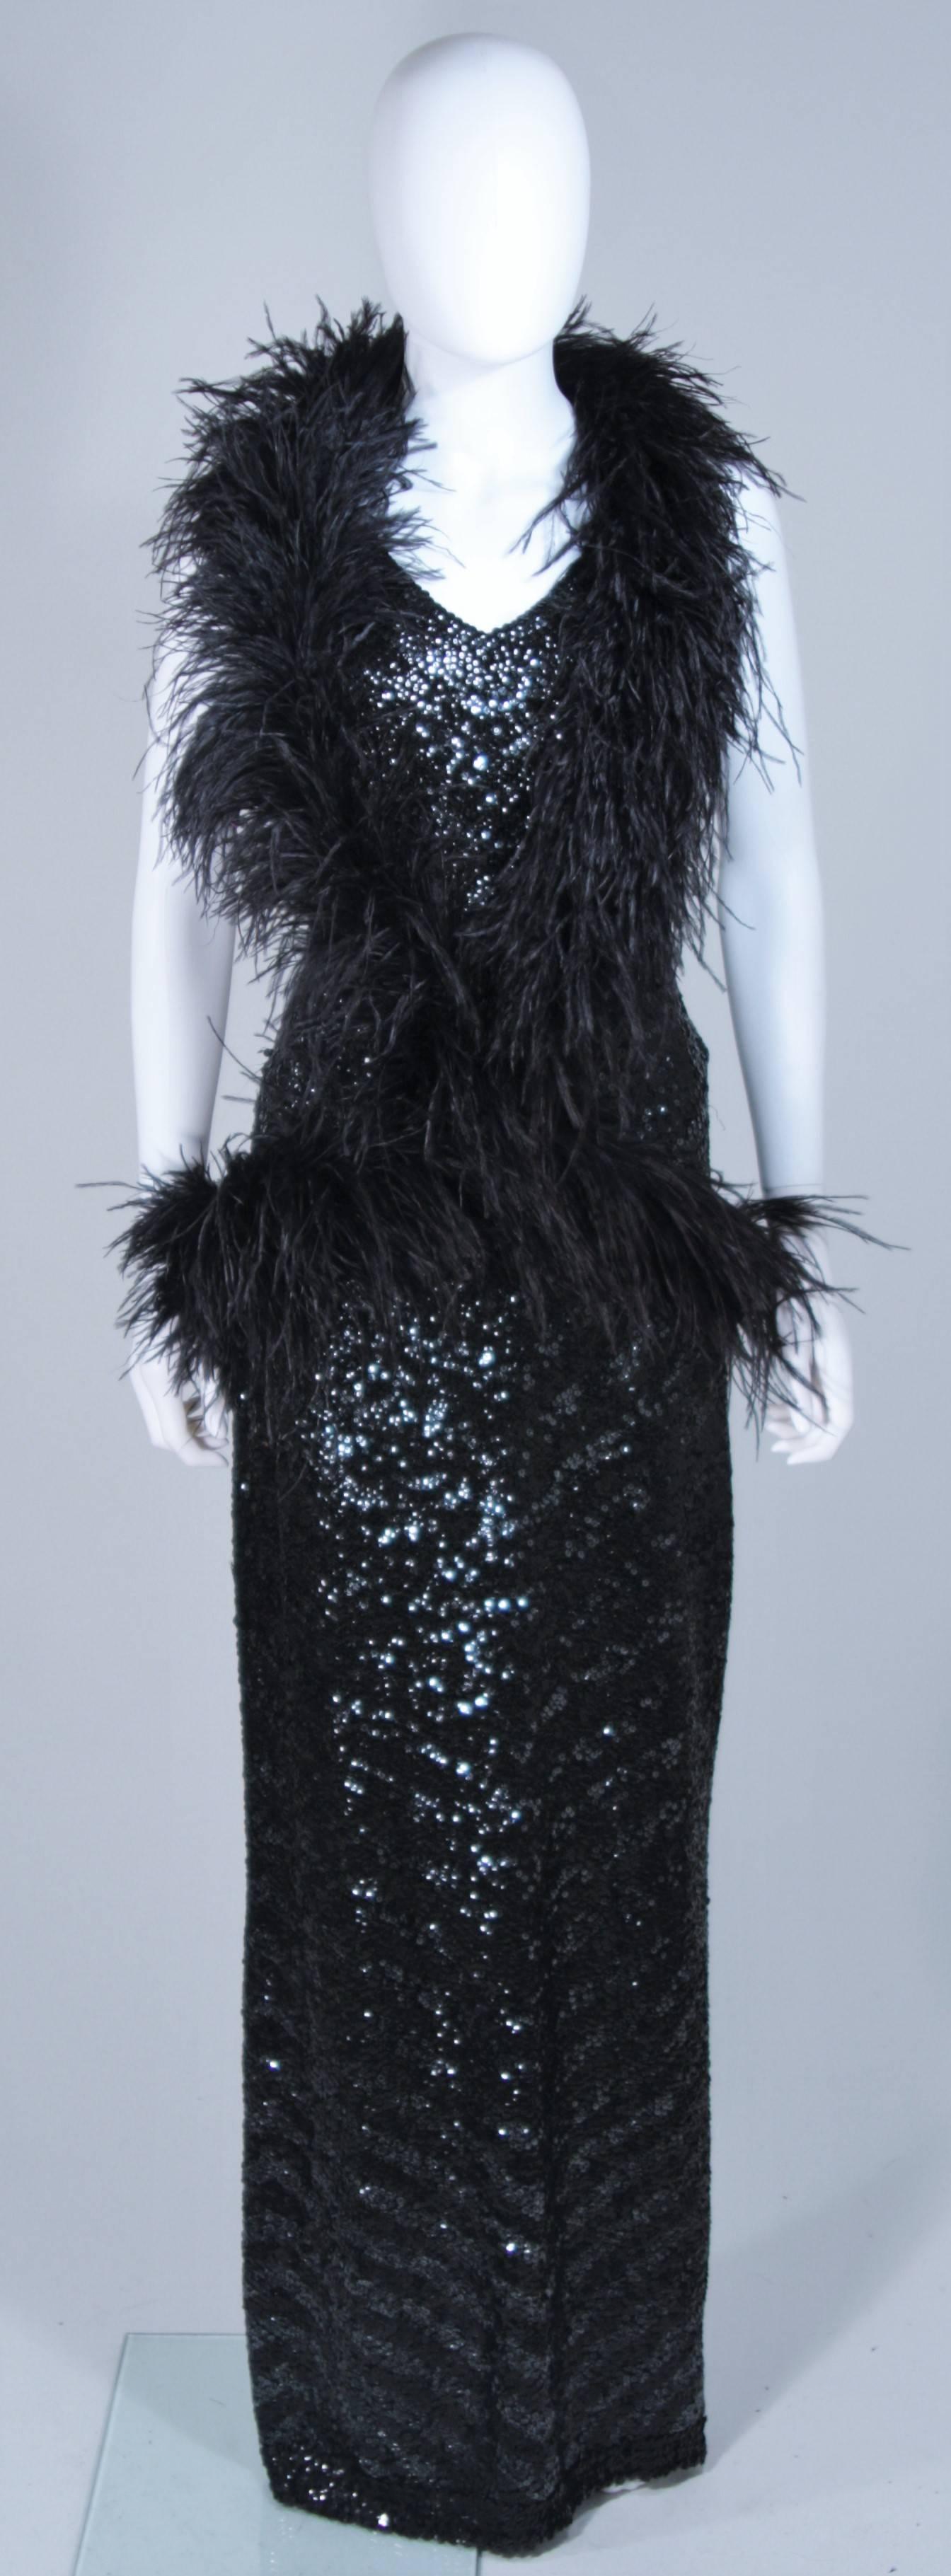 Black ELIZABETH MASON COUTURE Feather Wrap with Rhinestone closure Made to Order For Sale